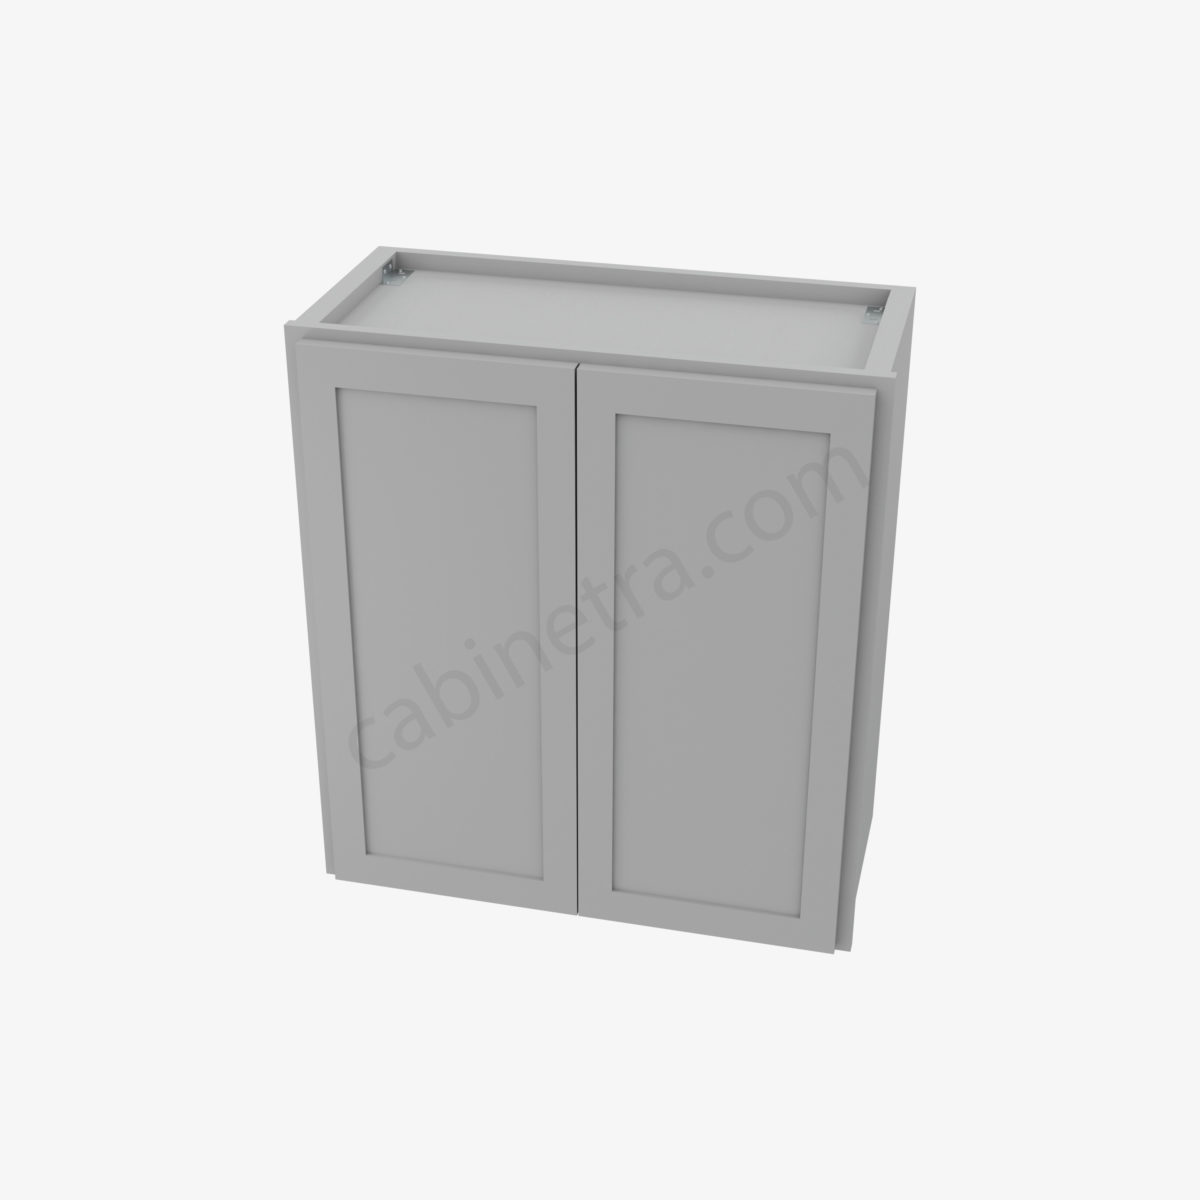 AB W2730B 3 Forevermark Lait Gray Shaker Cabinetra scaled